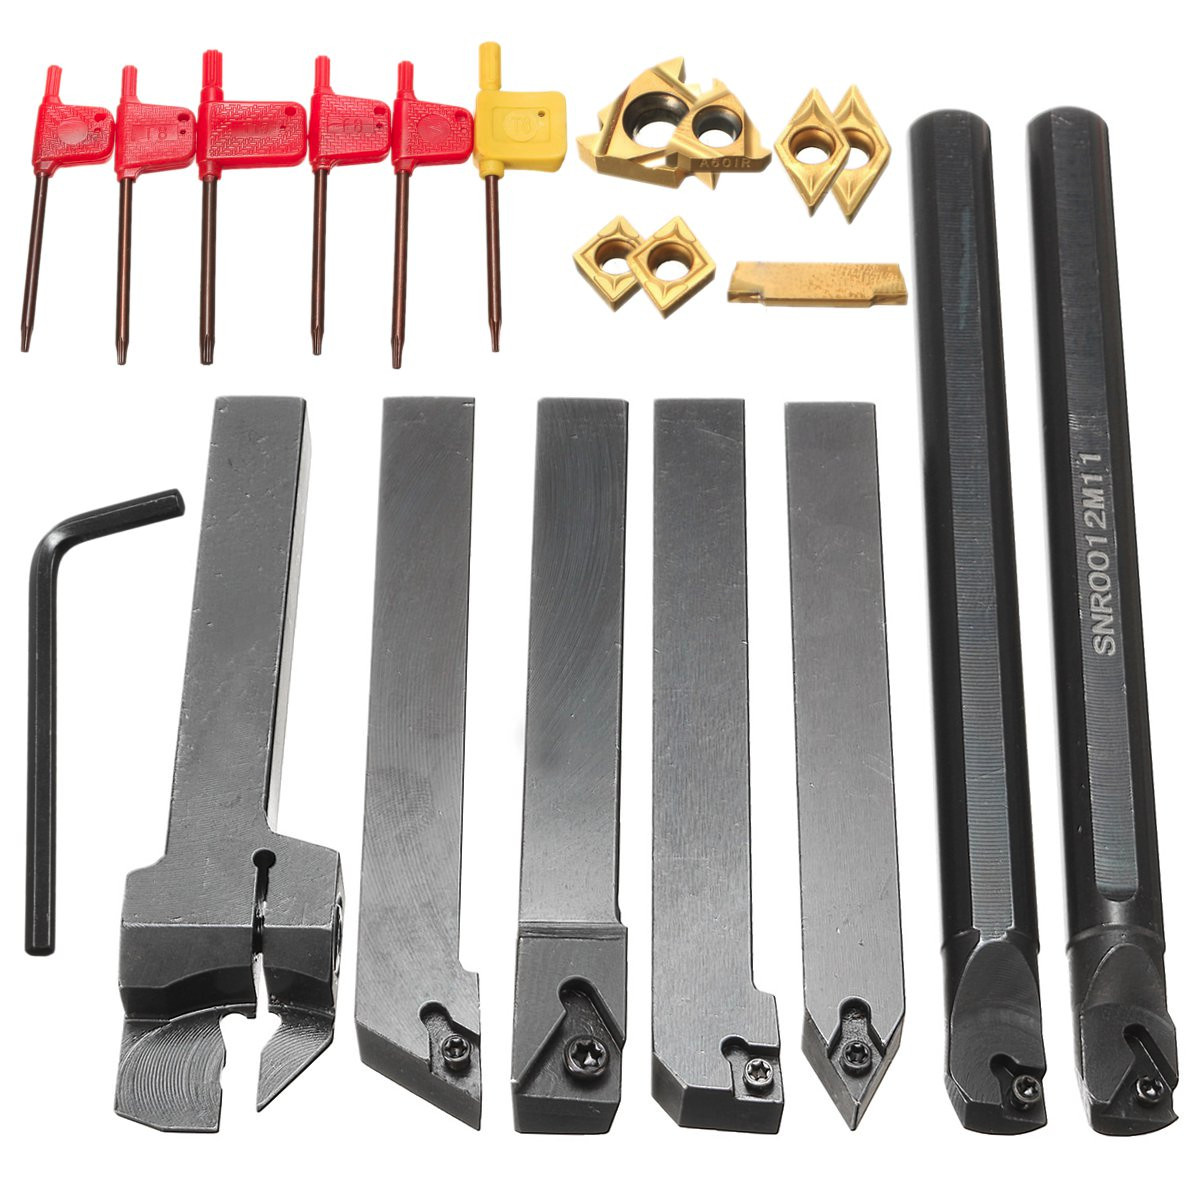 Drillpro-7pcs-12mm-Shank-Lathe-Set-Boring-Bar-Turning-Tool-Holder-with-Carbide-Inserts-CCMT060204-DC-1150453-3